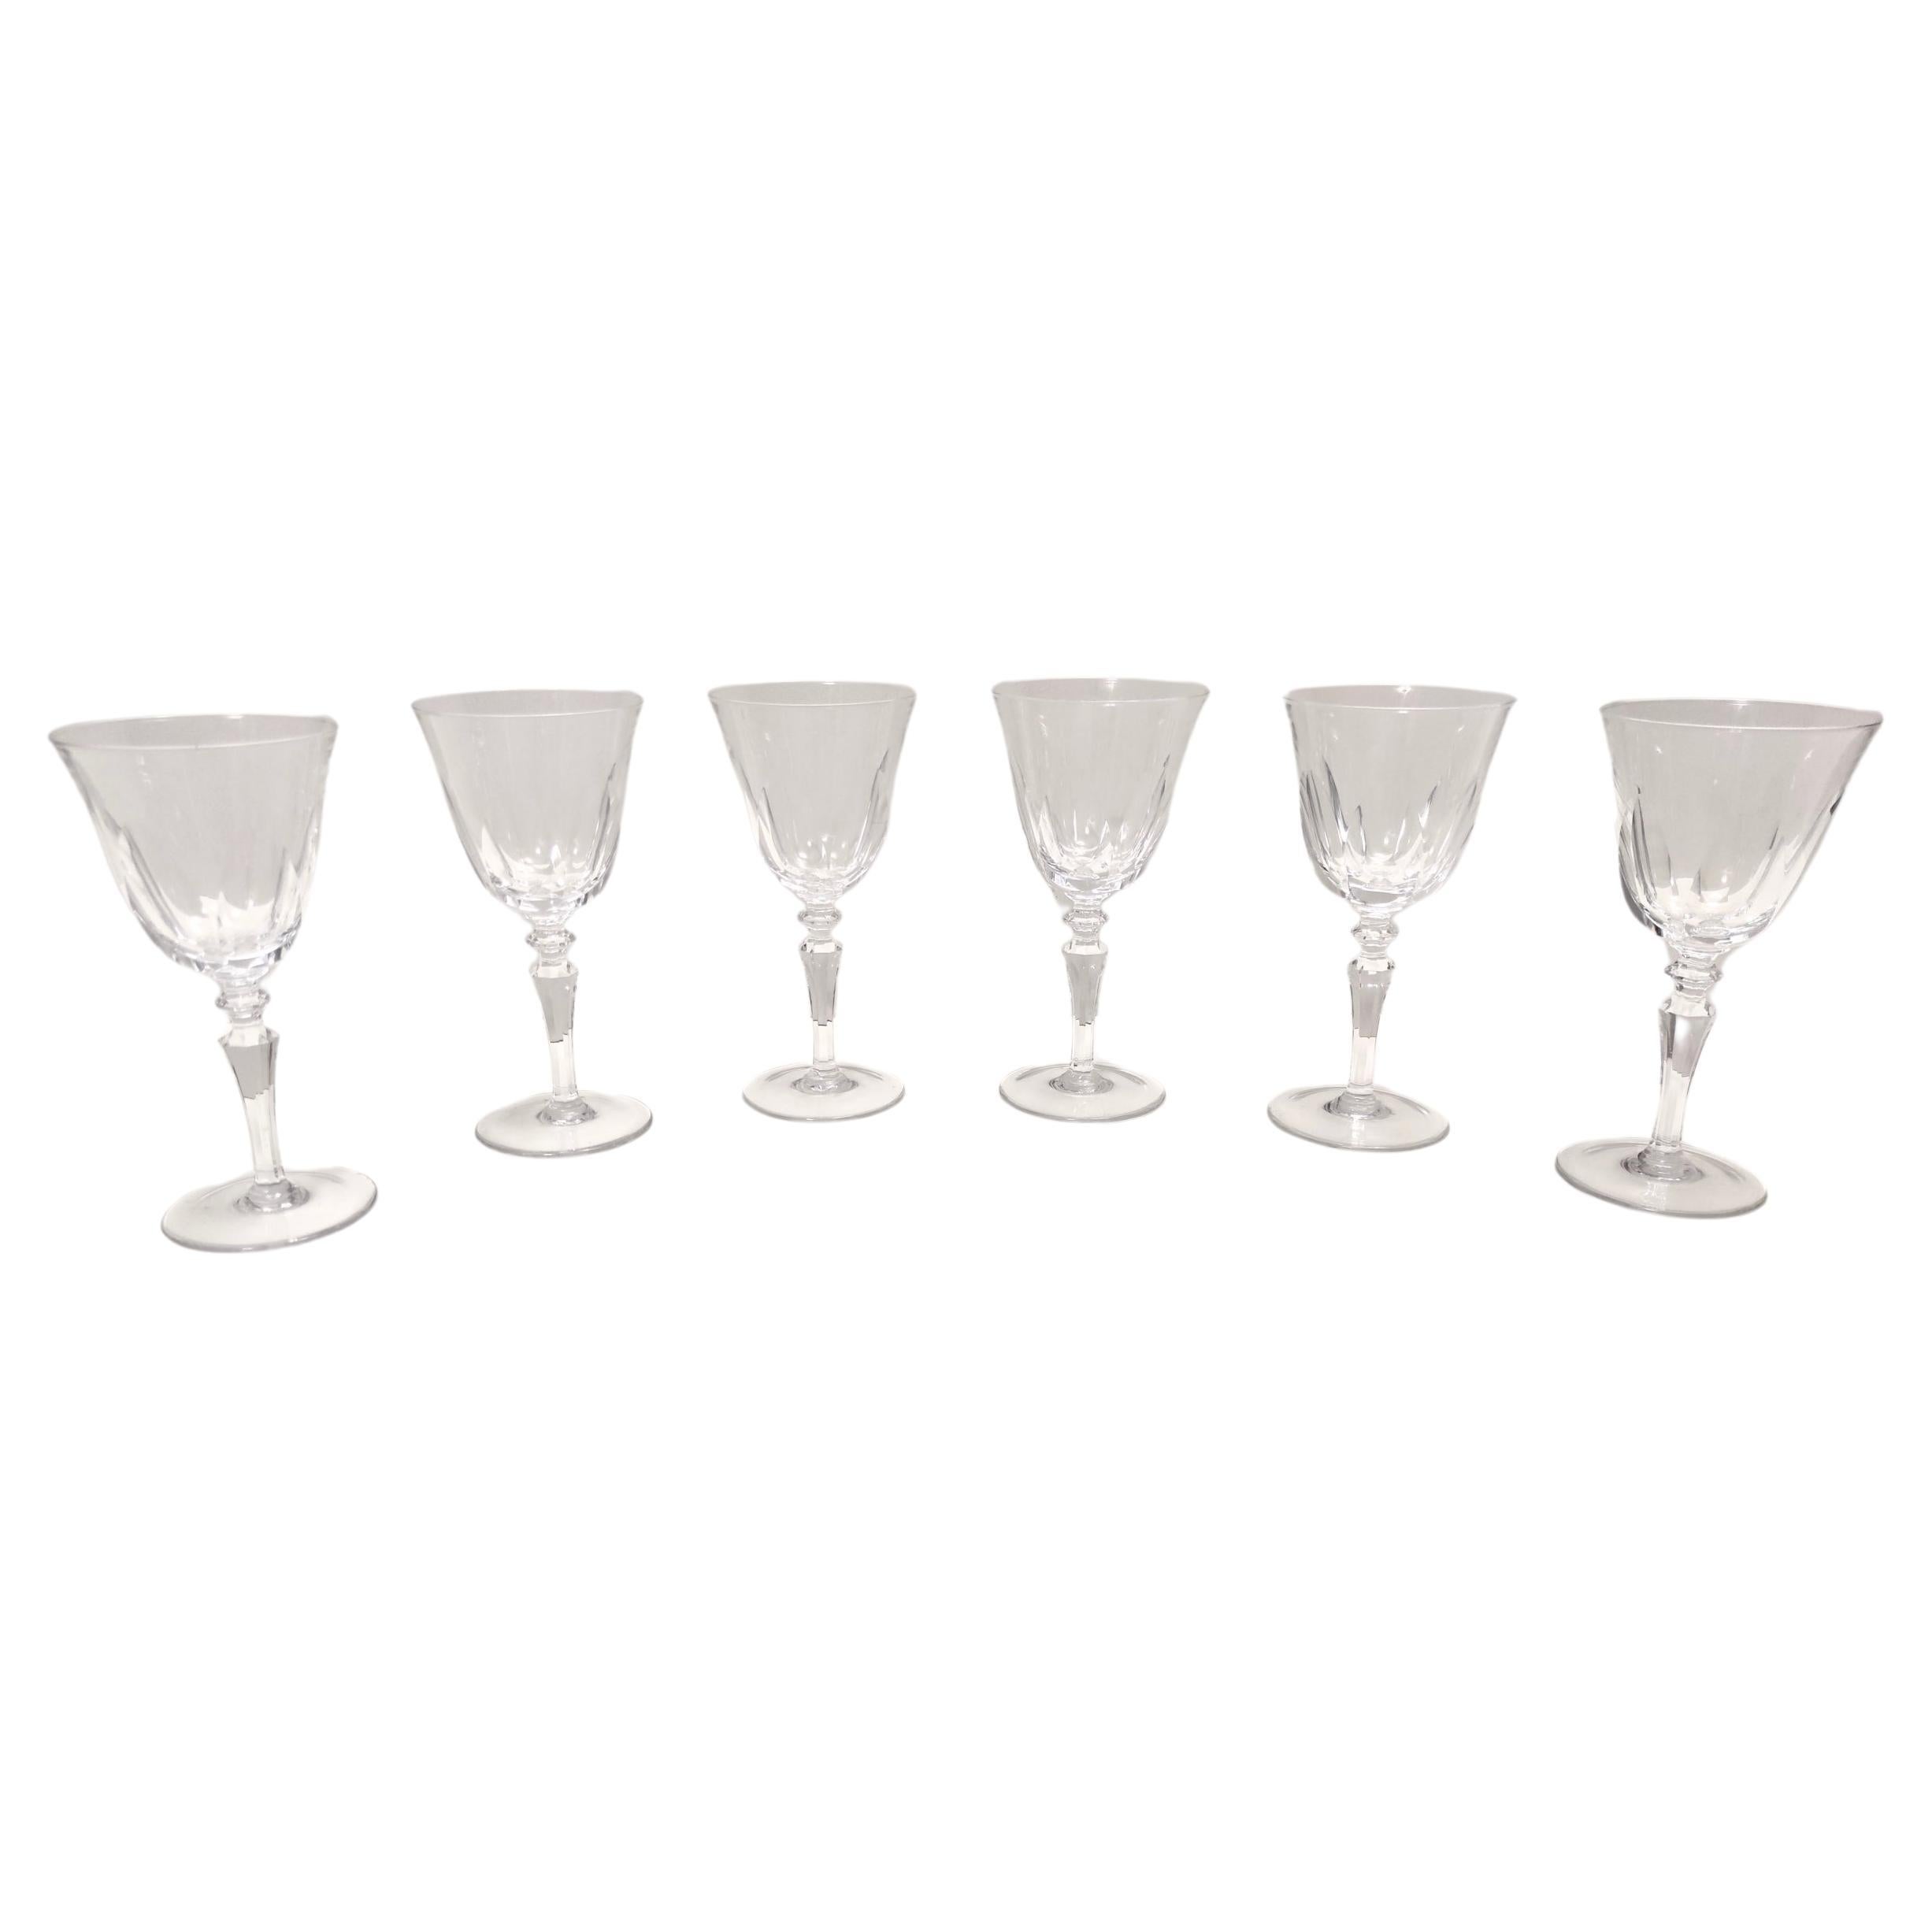 Postmodern Set of 5 Baccarat Crystal Champagne Coupes, France For Sale